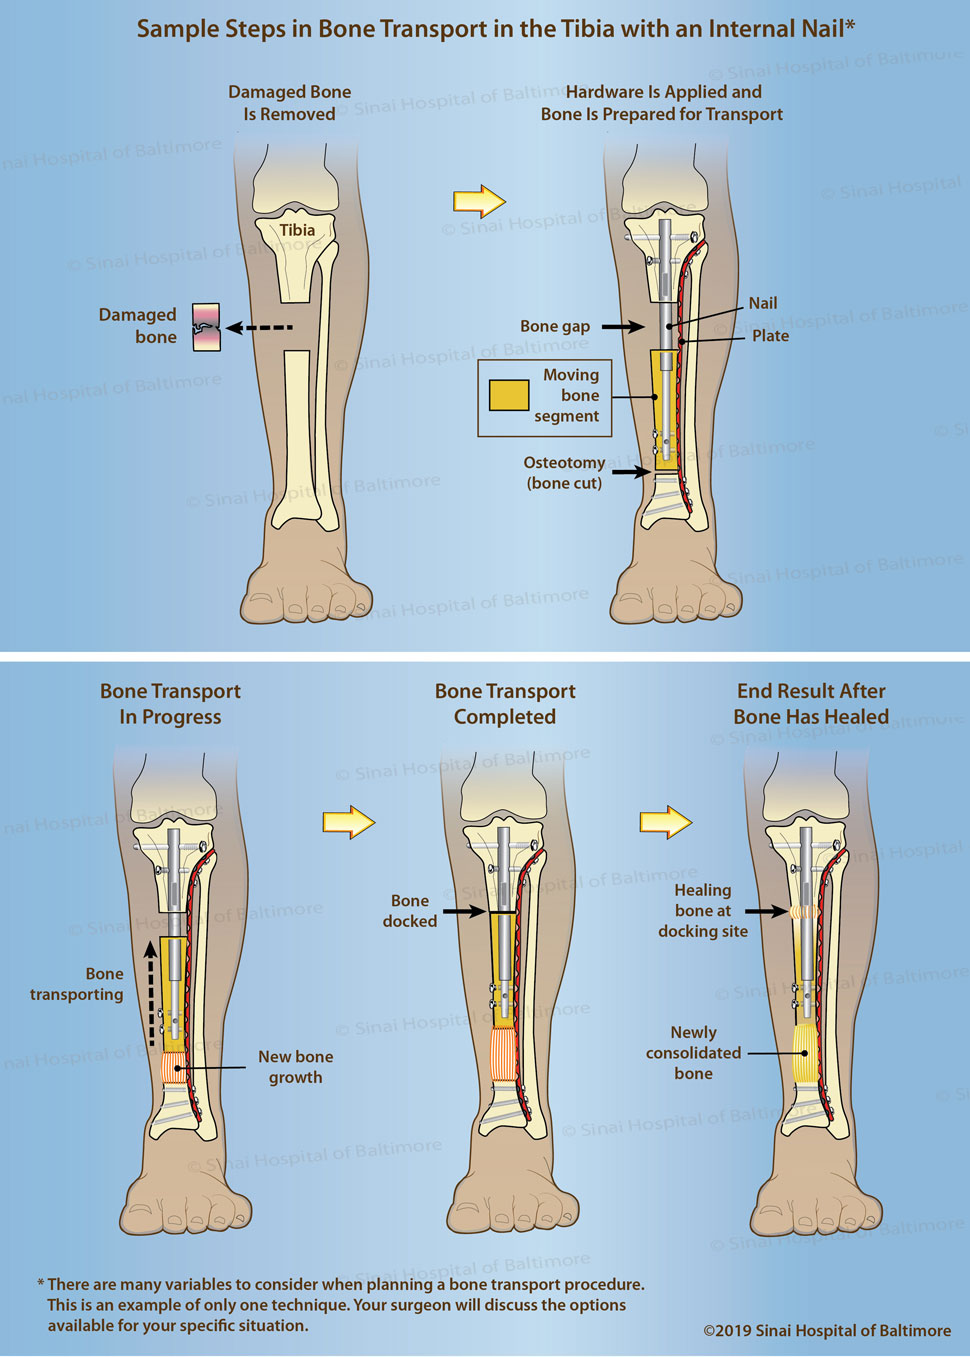 Illustration of a tibia showing the first two steps in bone transport with an internal nail - removing the damaged bone and then applying the hardware to prepare the bone for transport